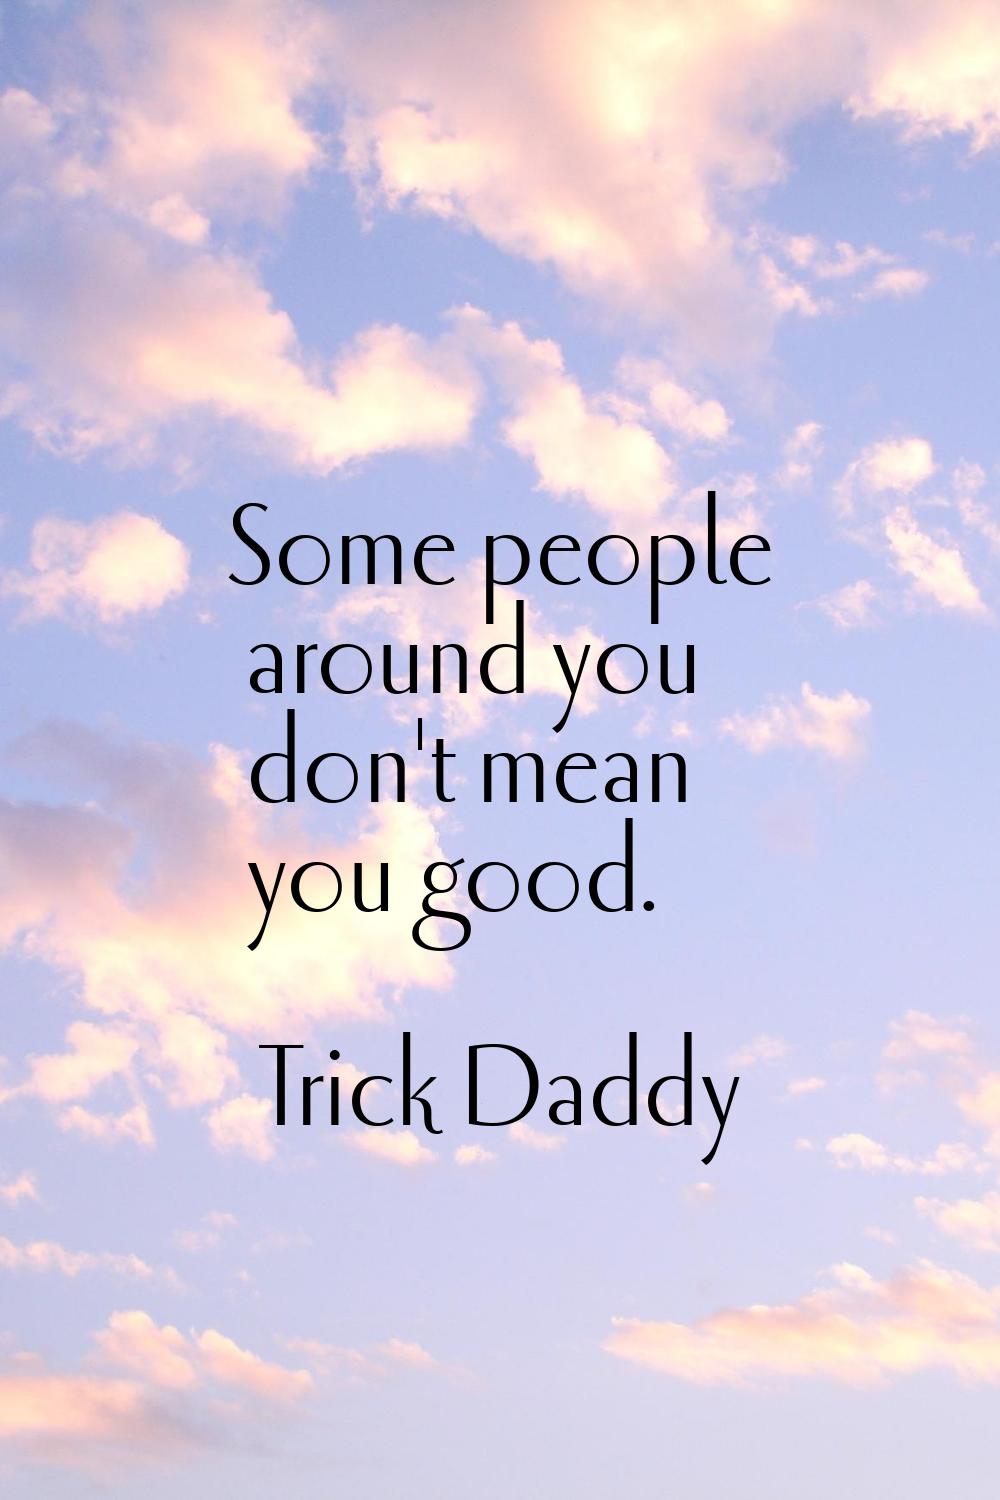 Some people around you don't mean you good.